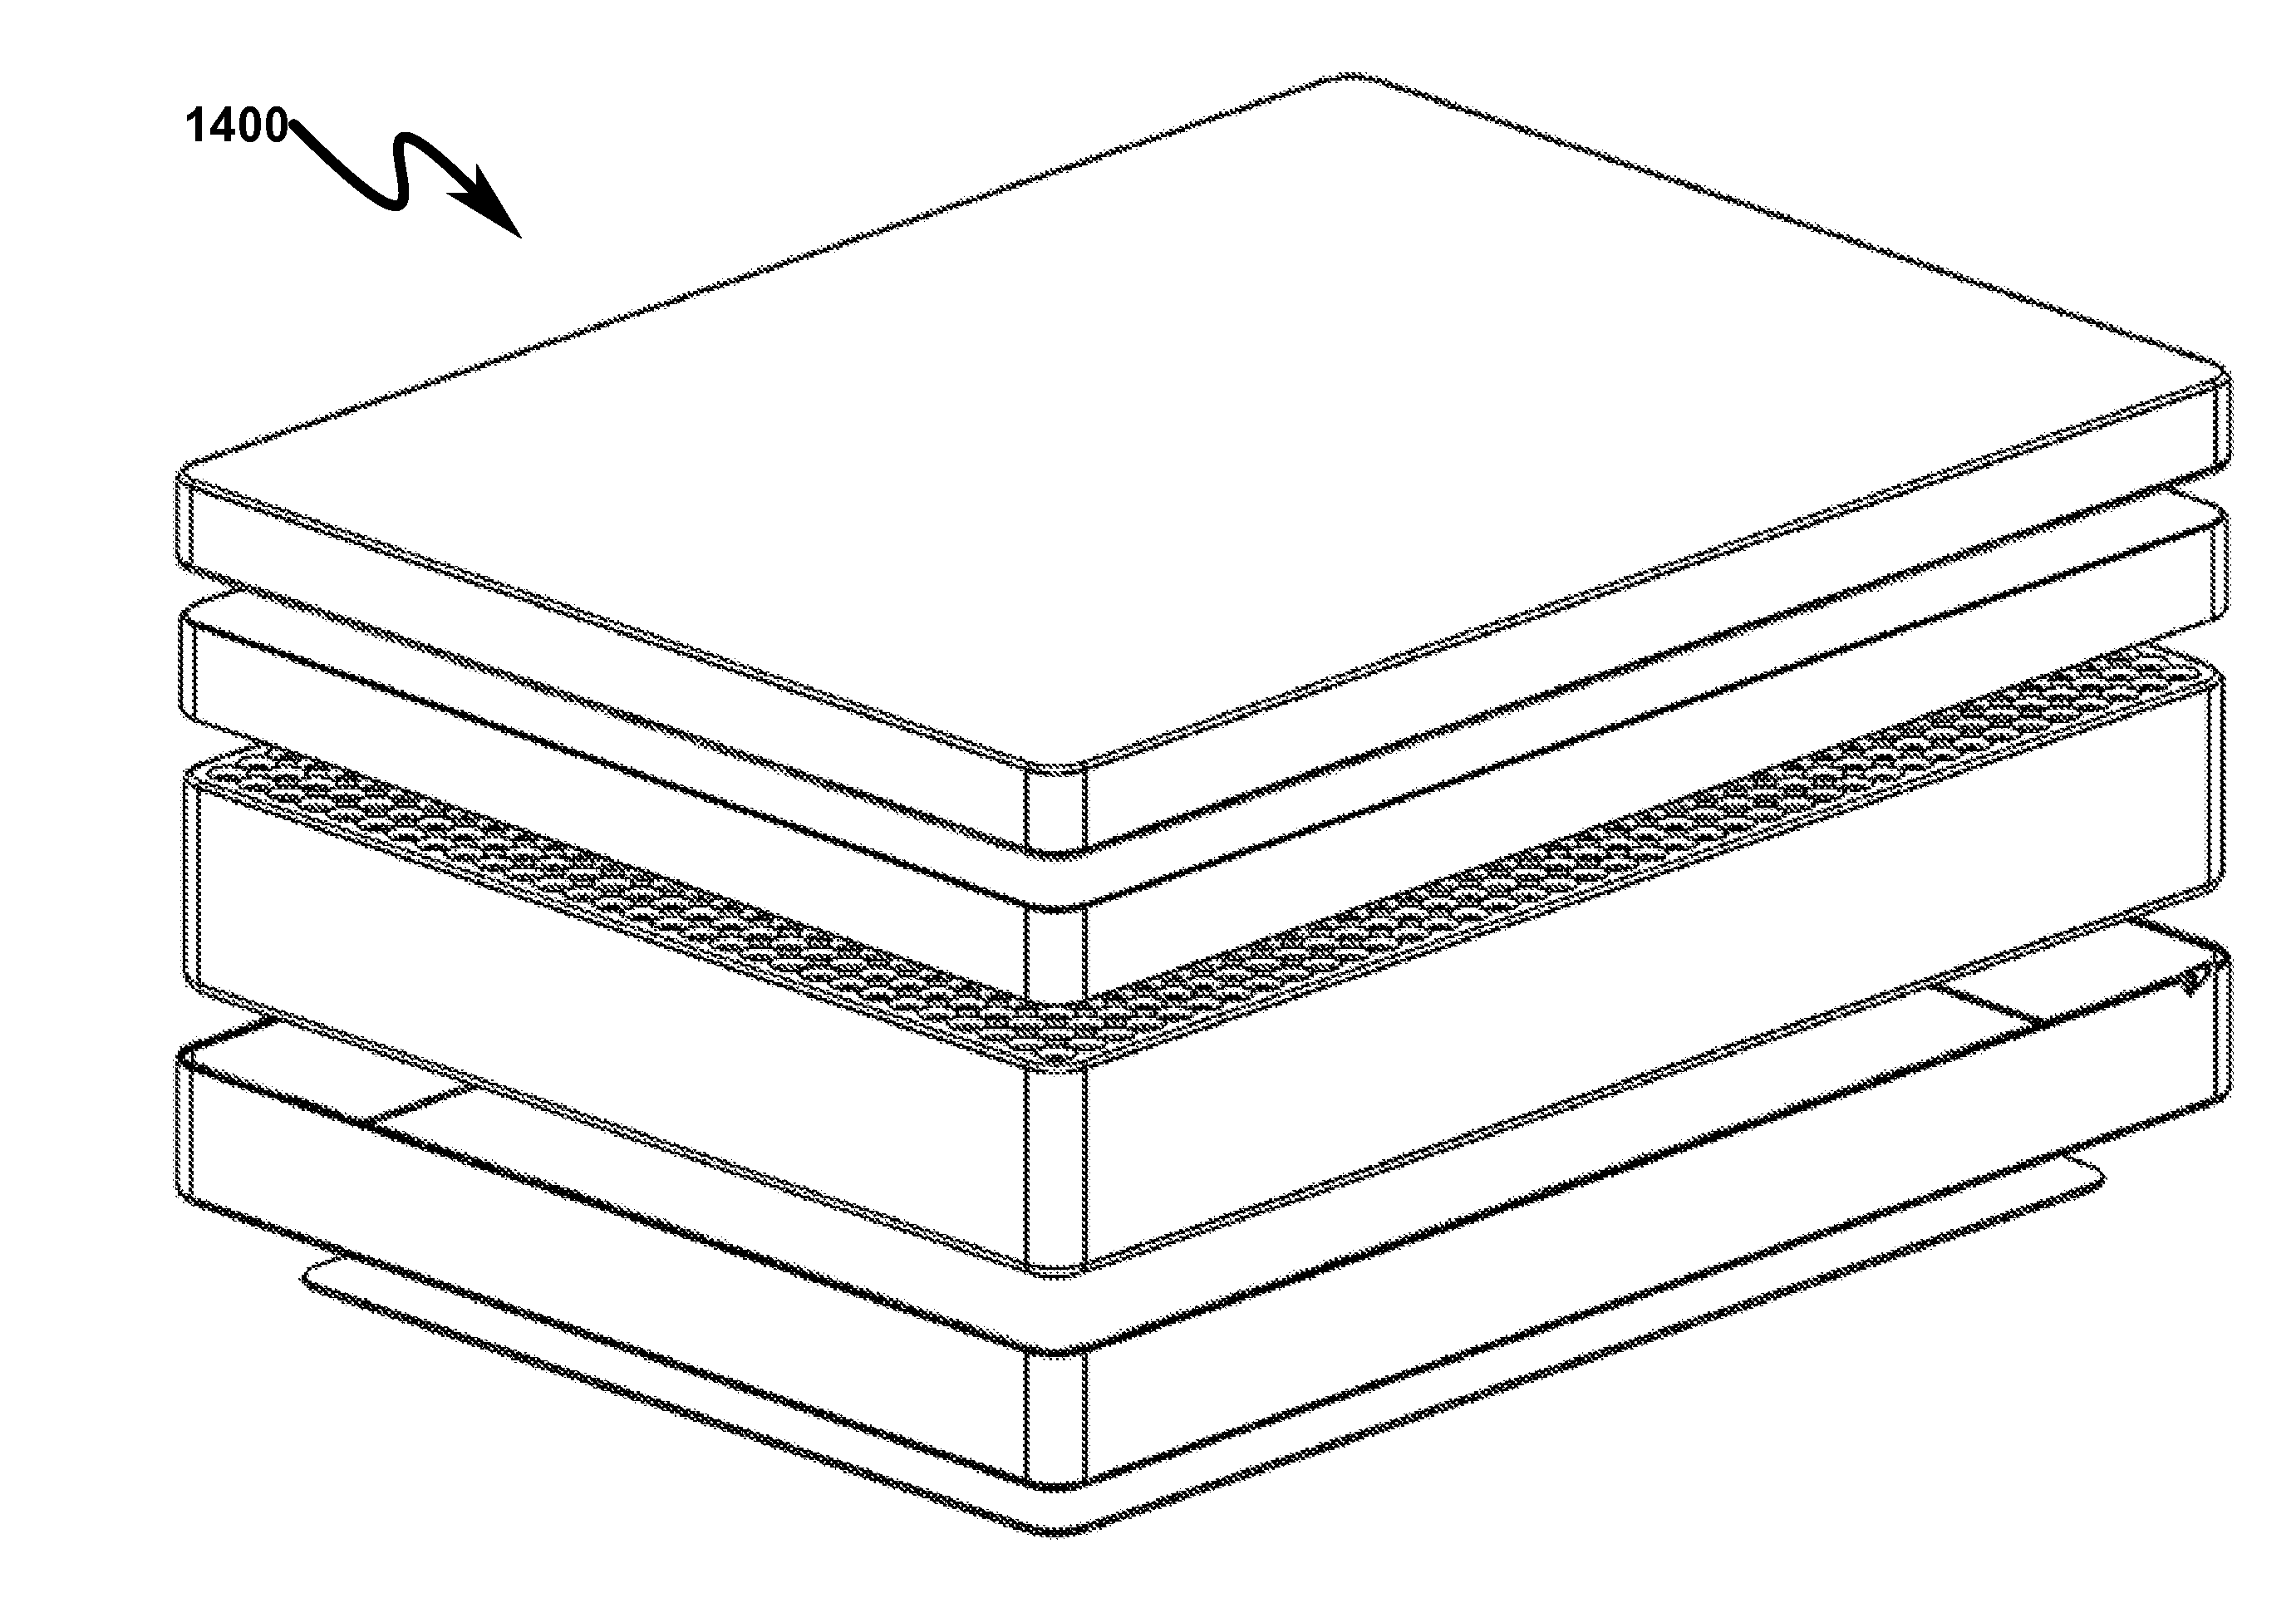 Field adjustable mattress system and method